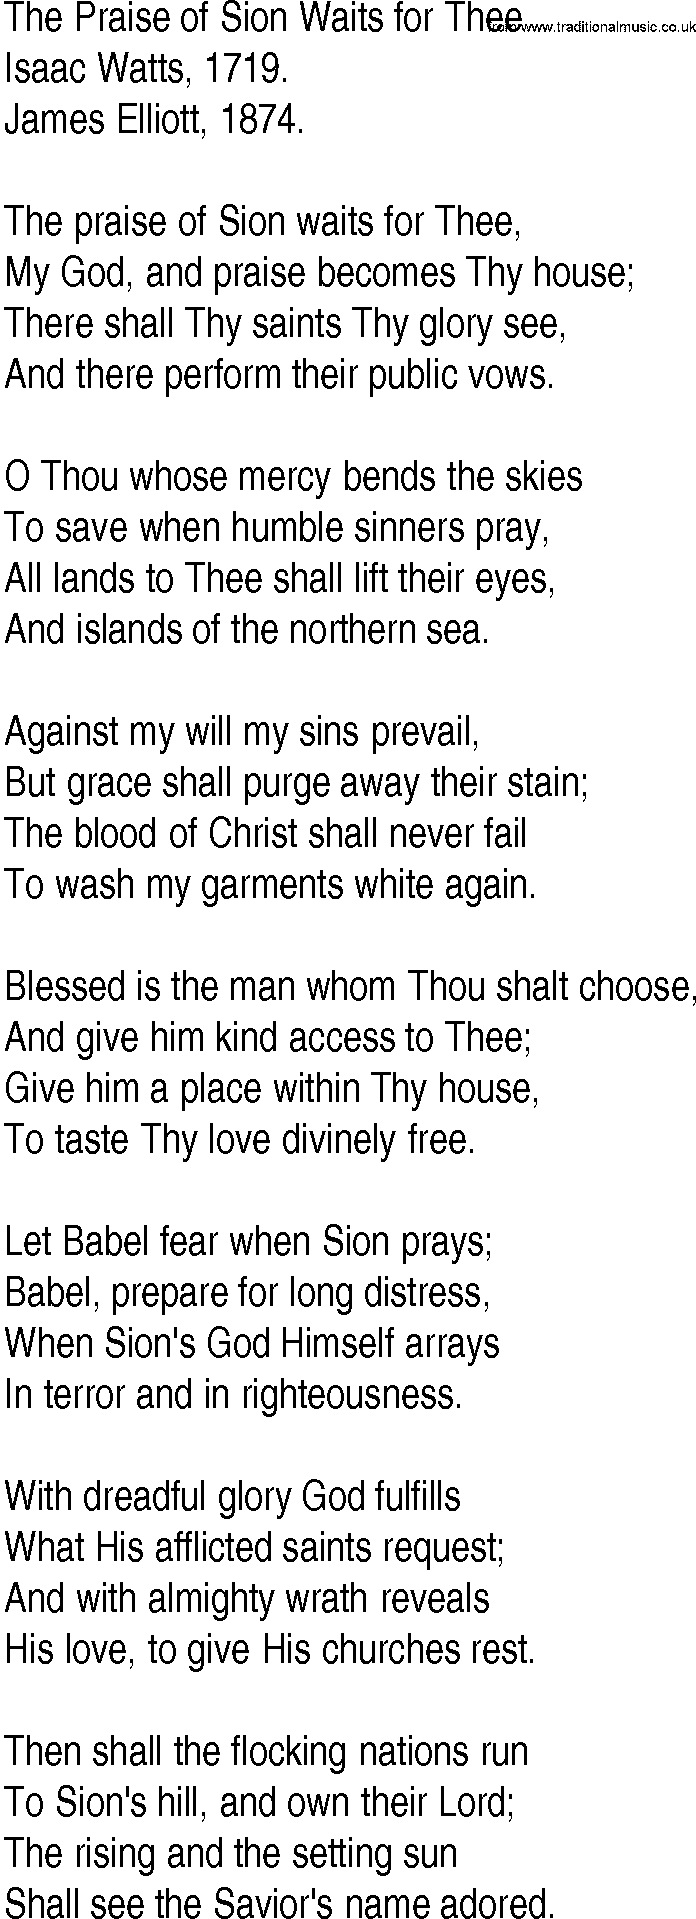 Hymn and Gospel Song: The Praise of Sion Waits for Thee by Isaac Watts lyrics